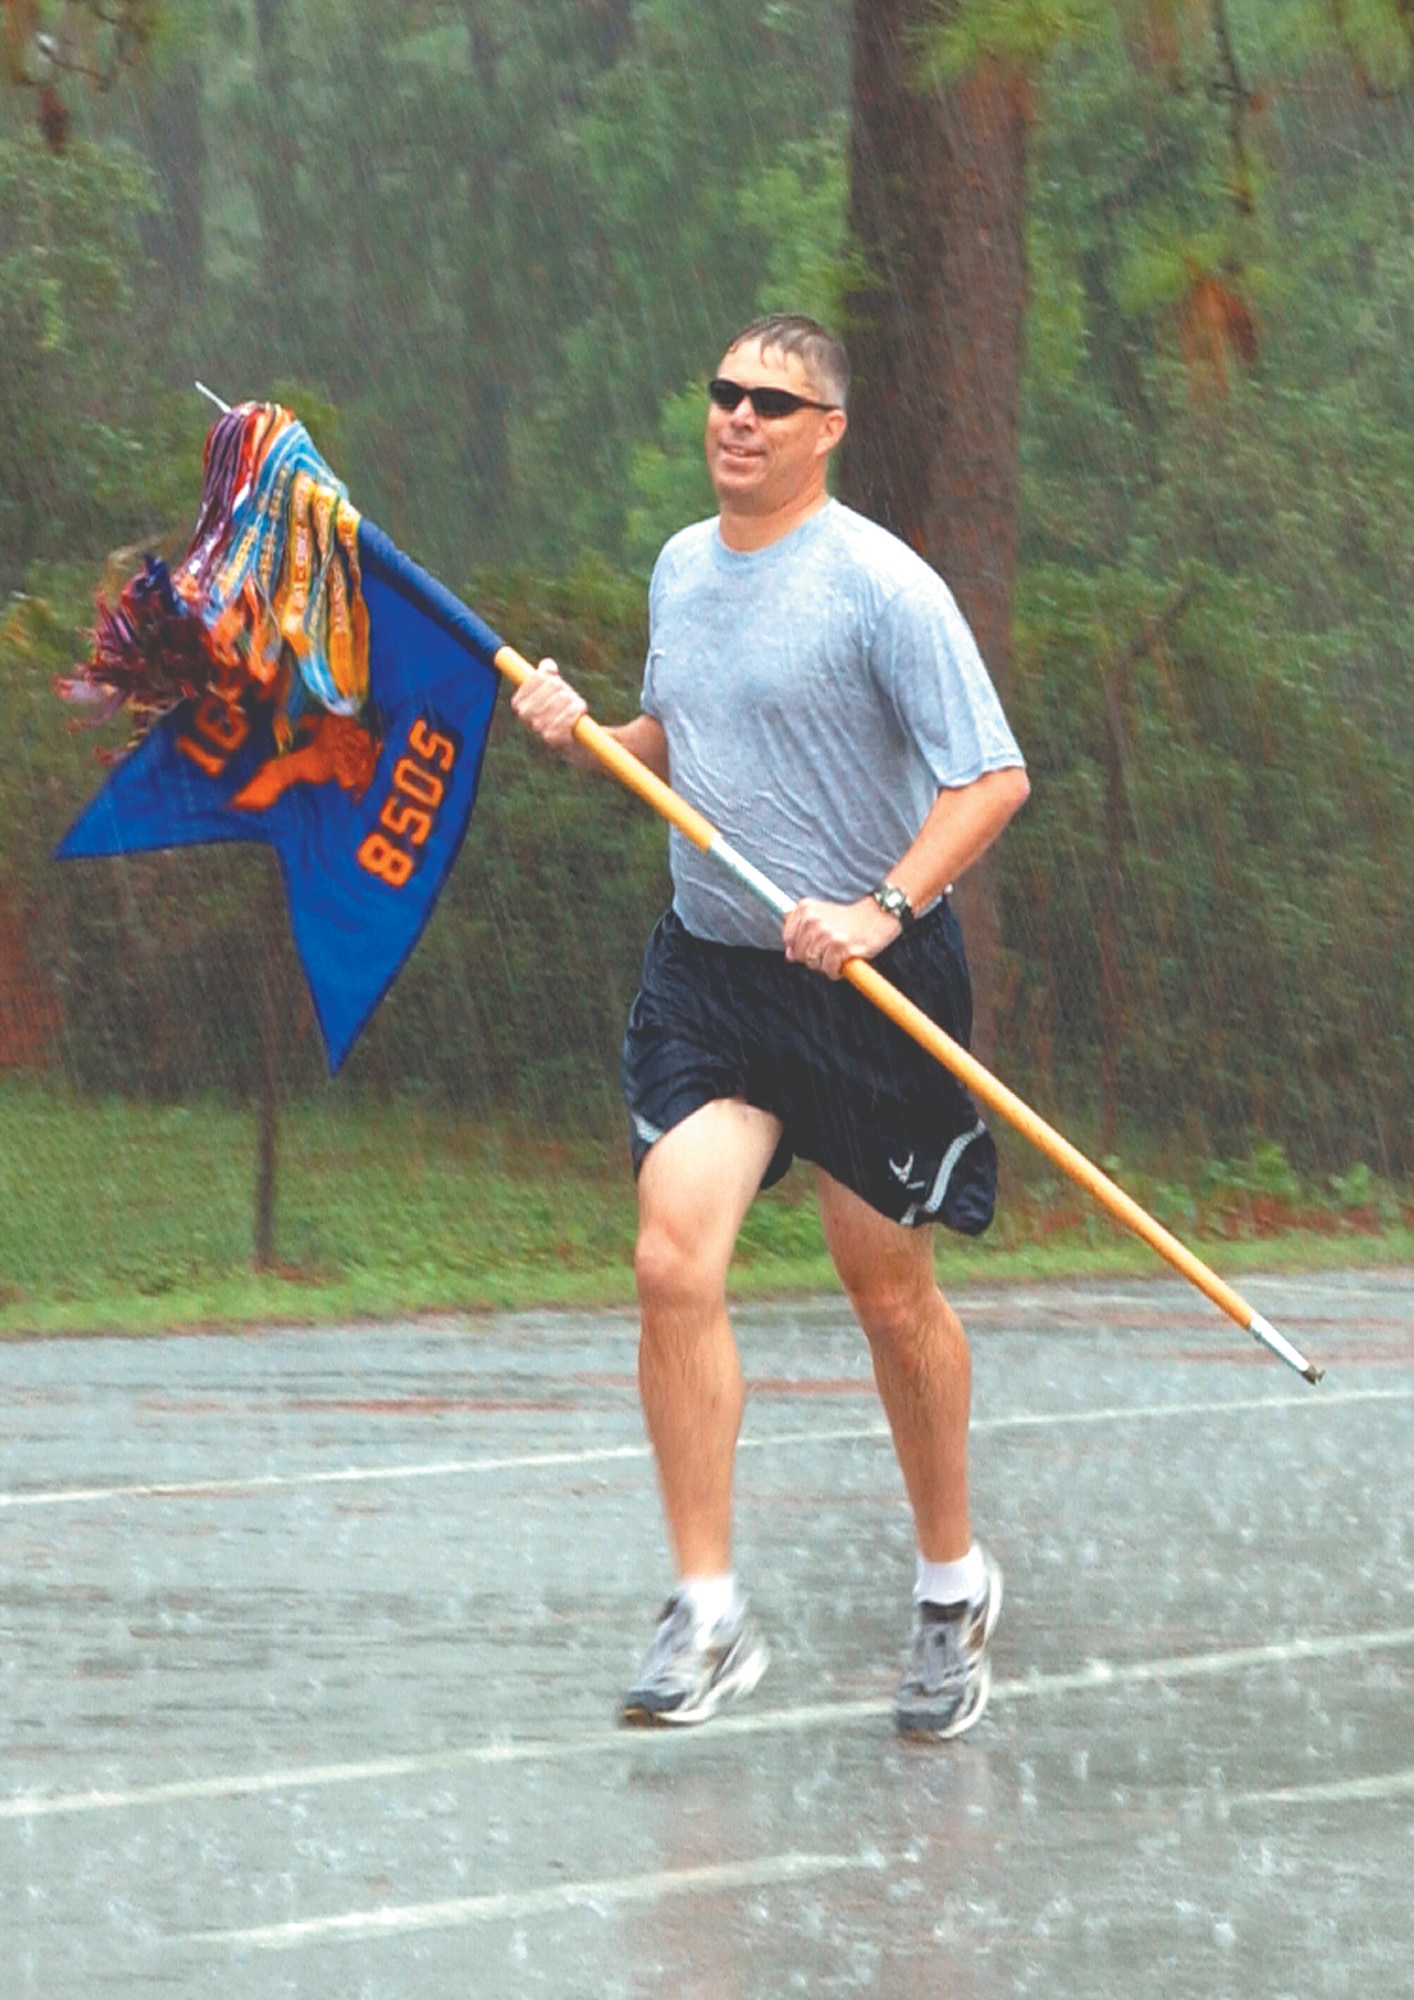 An Airman from the 8th Special Operations Squadron nears Hurlburt Field Aug. 9 with the unit's guidon. As part of the 8th SOS transition festivities, a team of Airmen ran the guidon 26 miles back to Hurlburt Field the same way it was delivered to Duke Field six years ago. (U.S. Air Force photograph by Senior Airman Andy Kin)